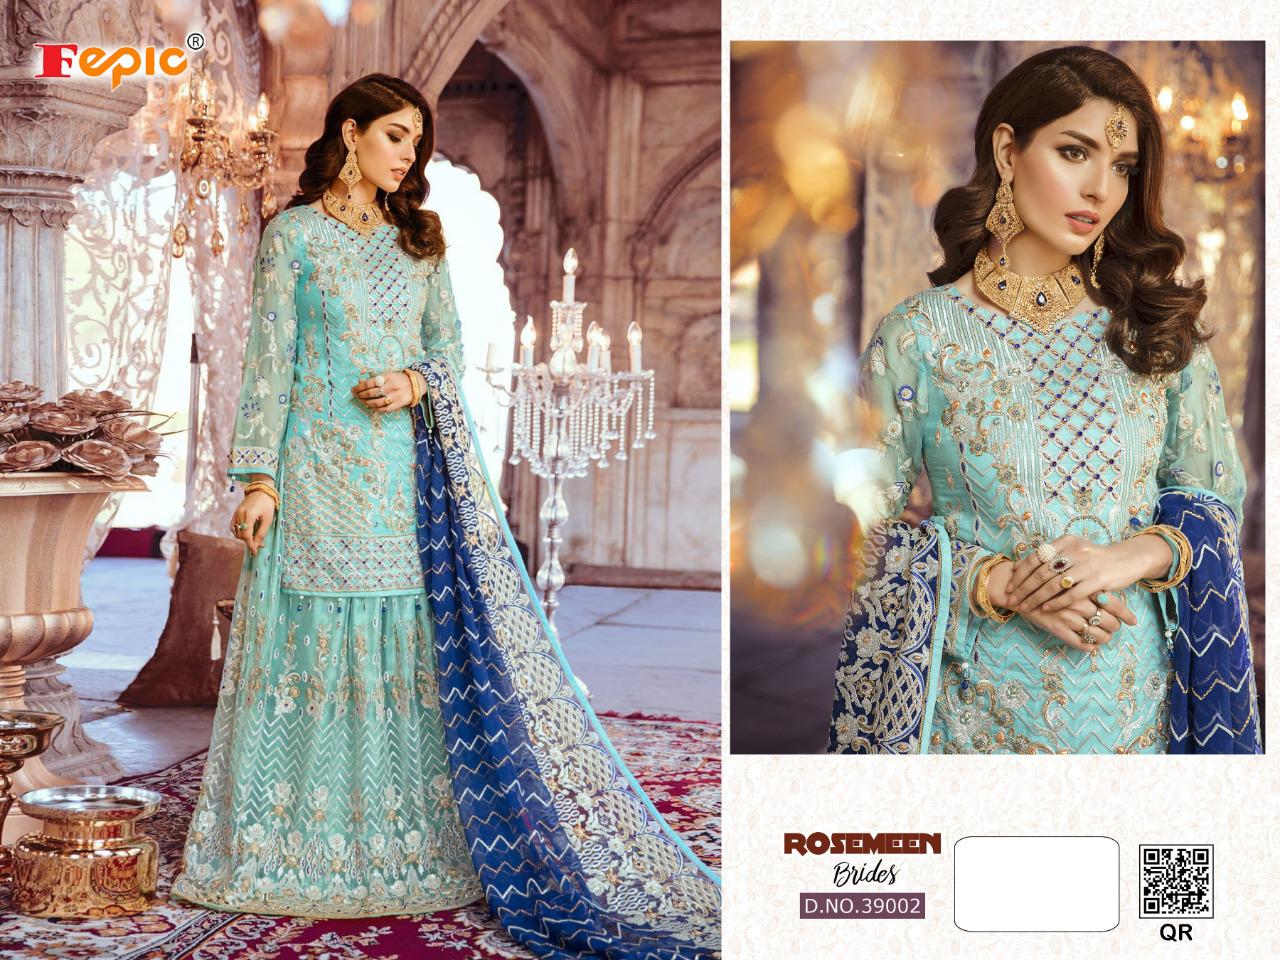 fepic rosemeen brides georgette innovative style sharara style catalog